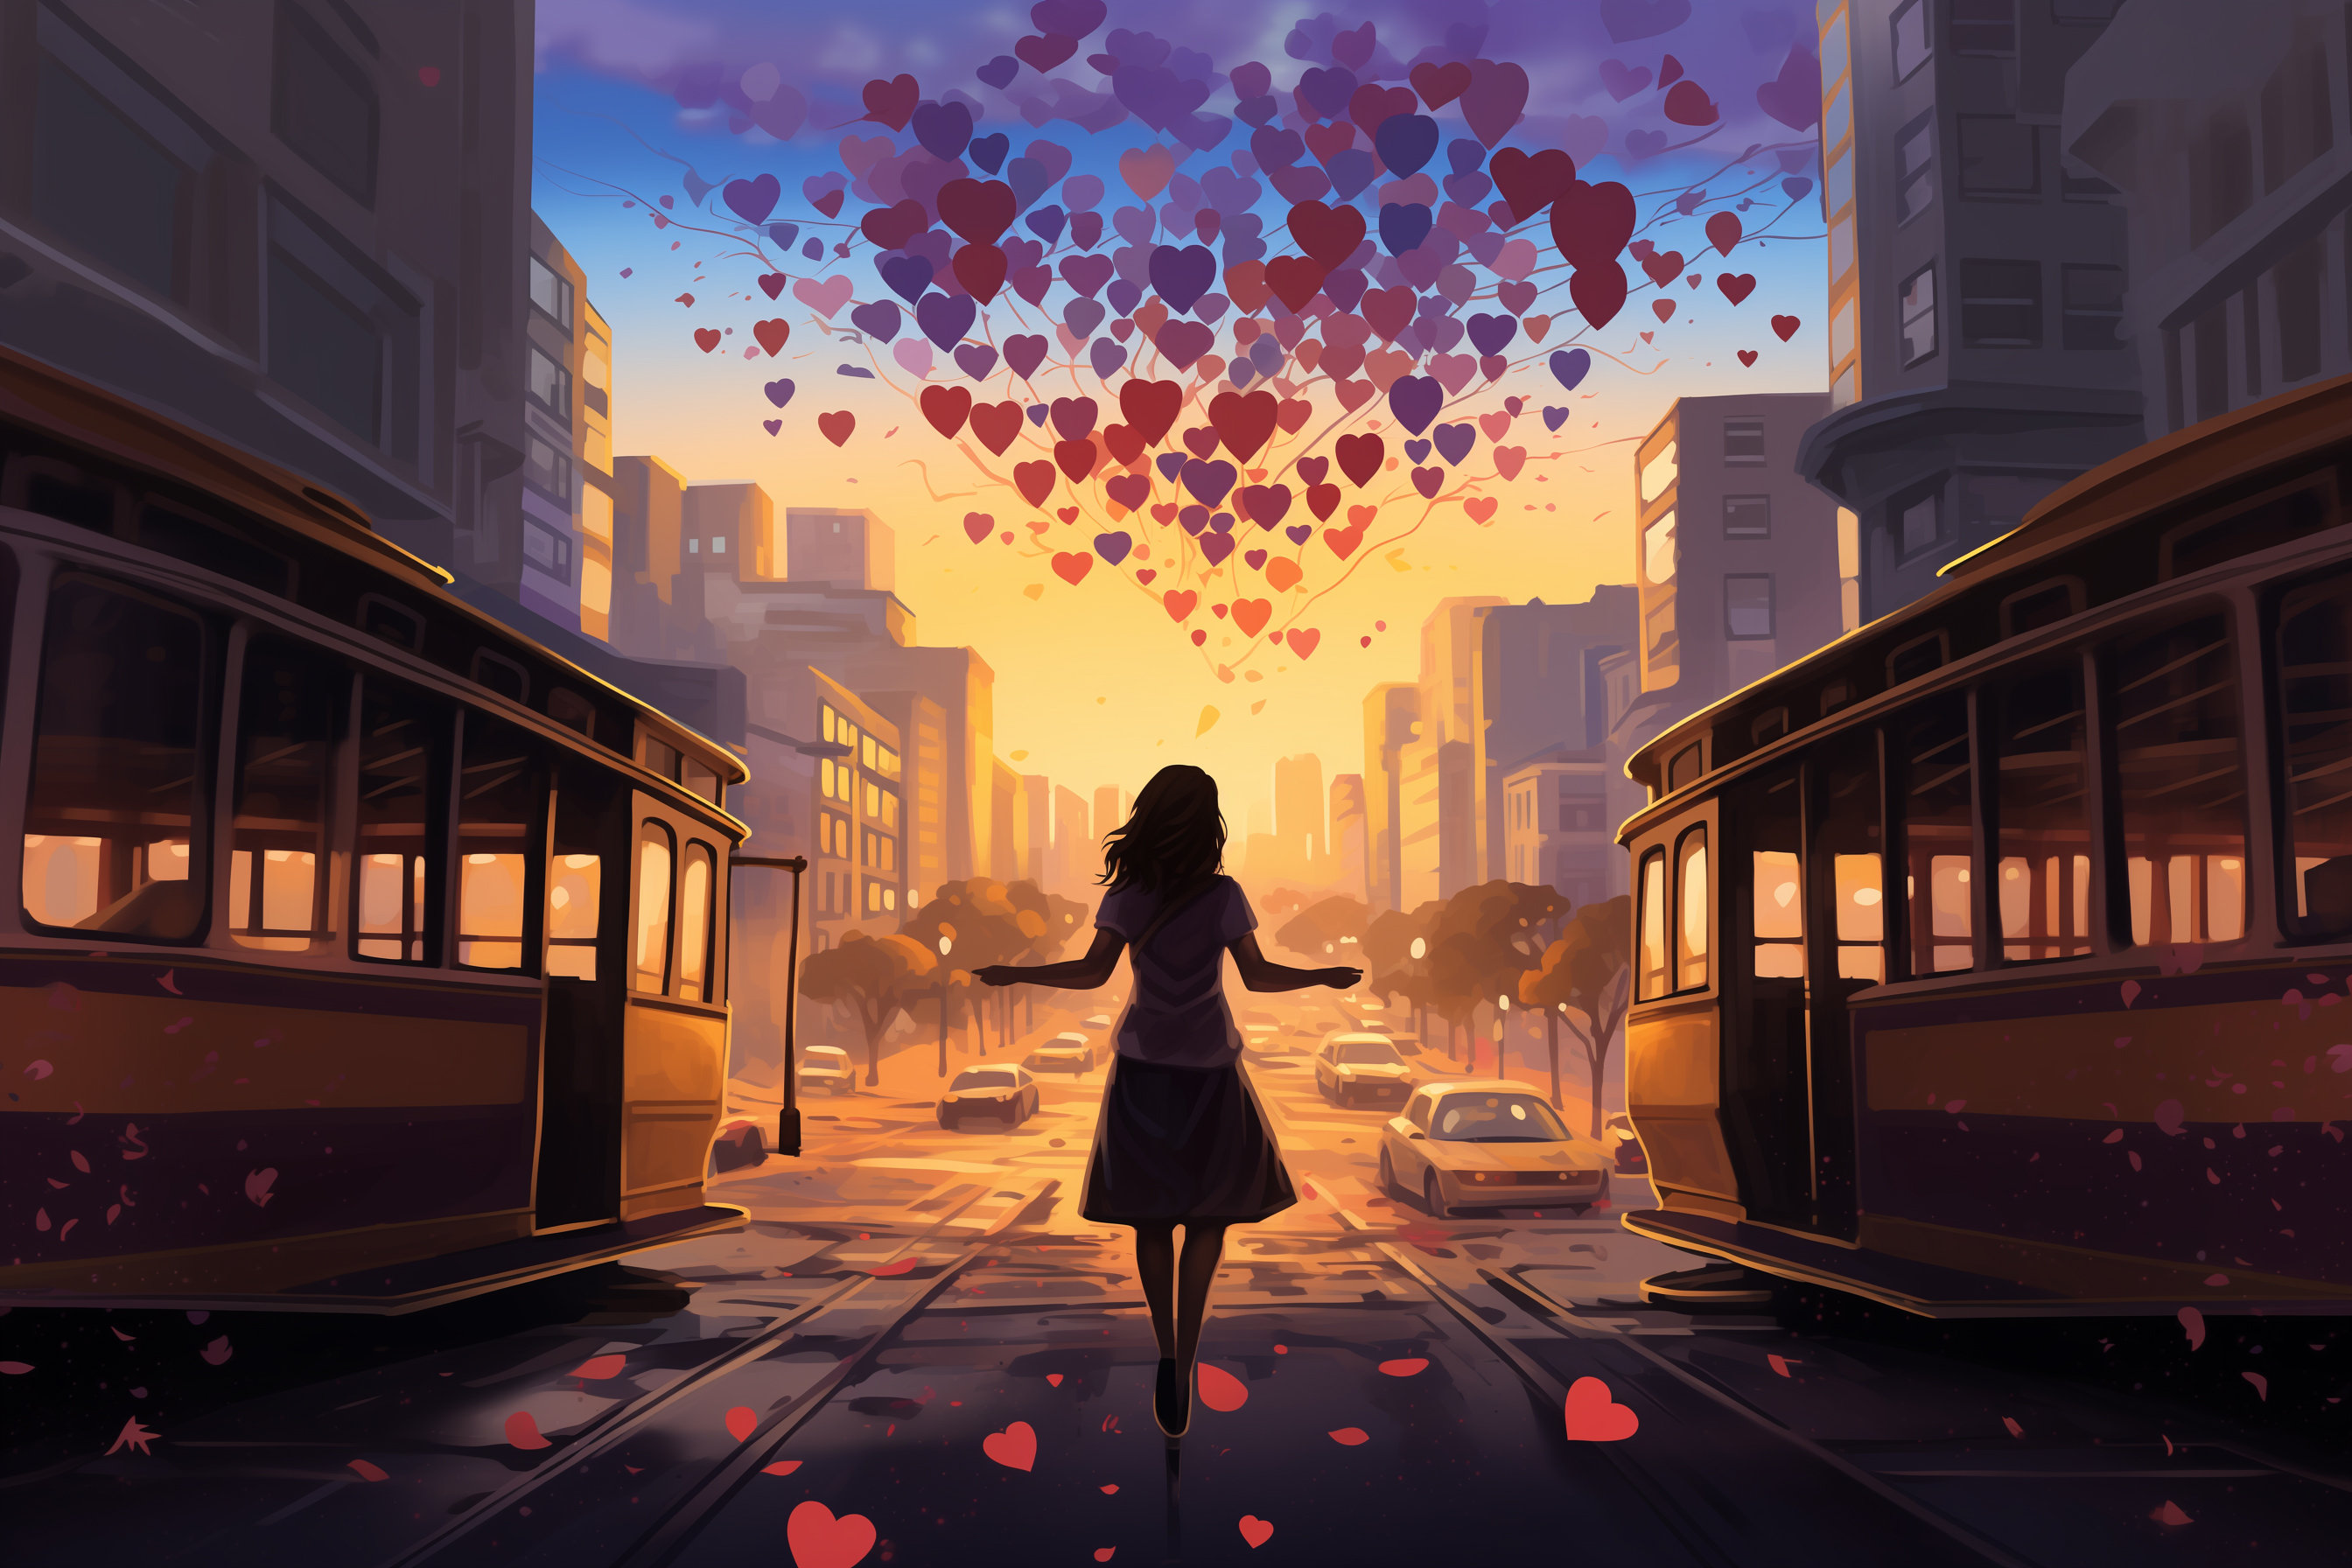 A girl in a city with heart-shaped balloons in the sky, between two cable cars at sunset.